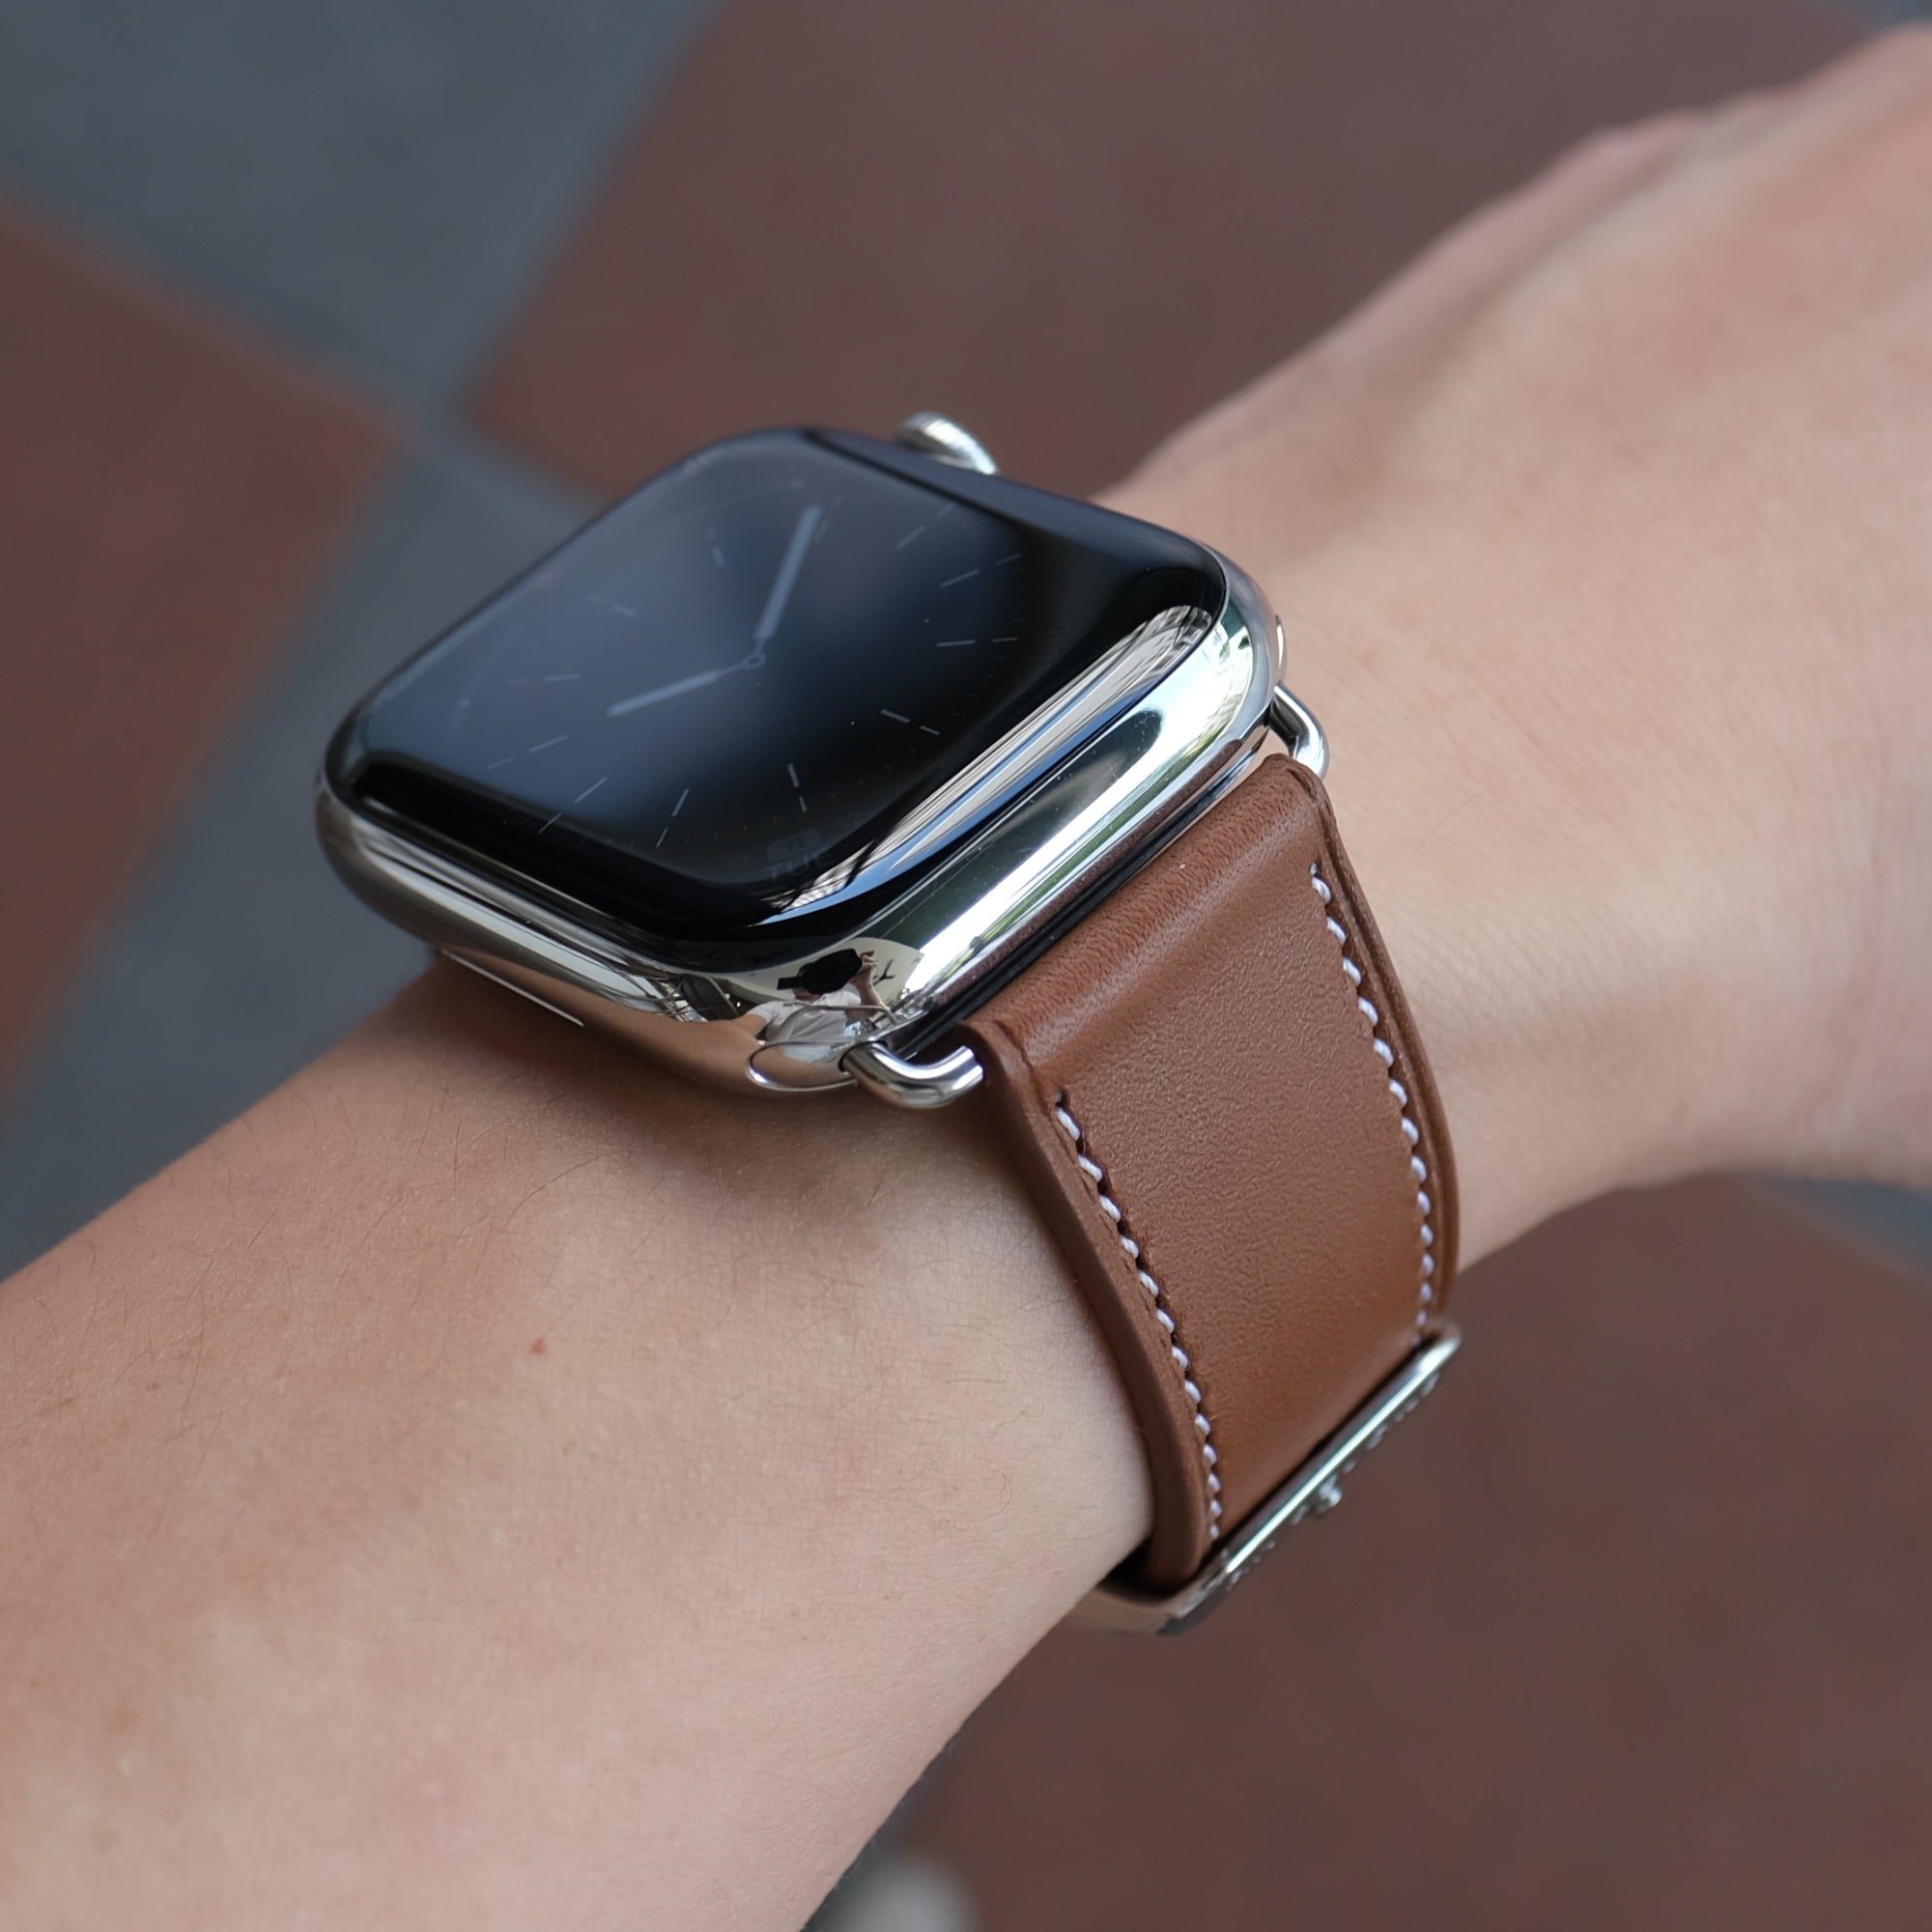 Apple Watch Leather - Mahogany/Natural/Silver Aluminum